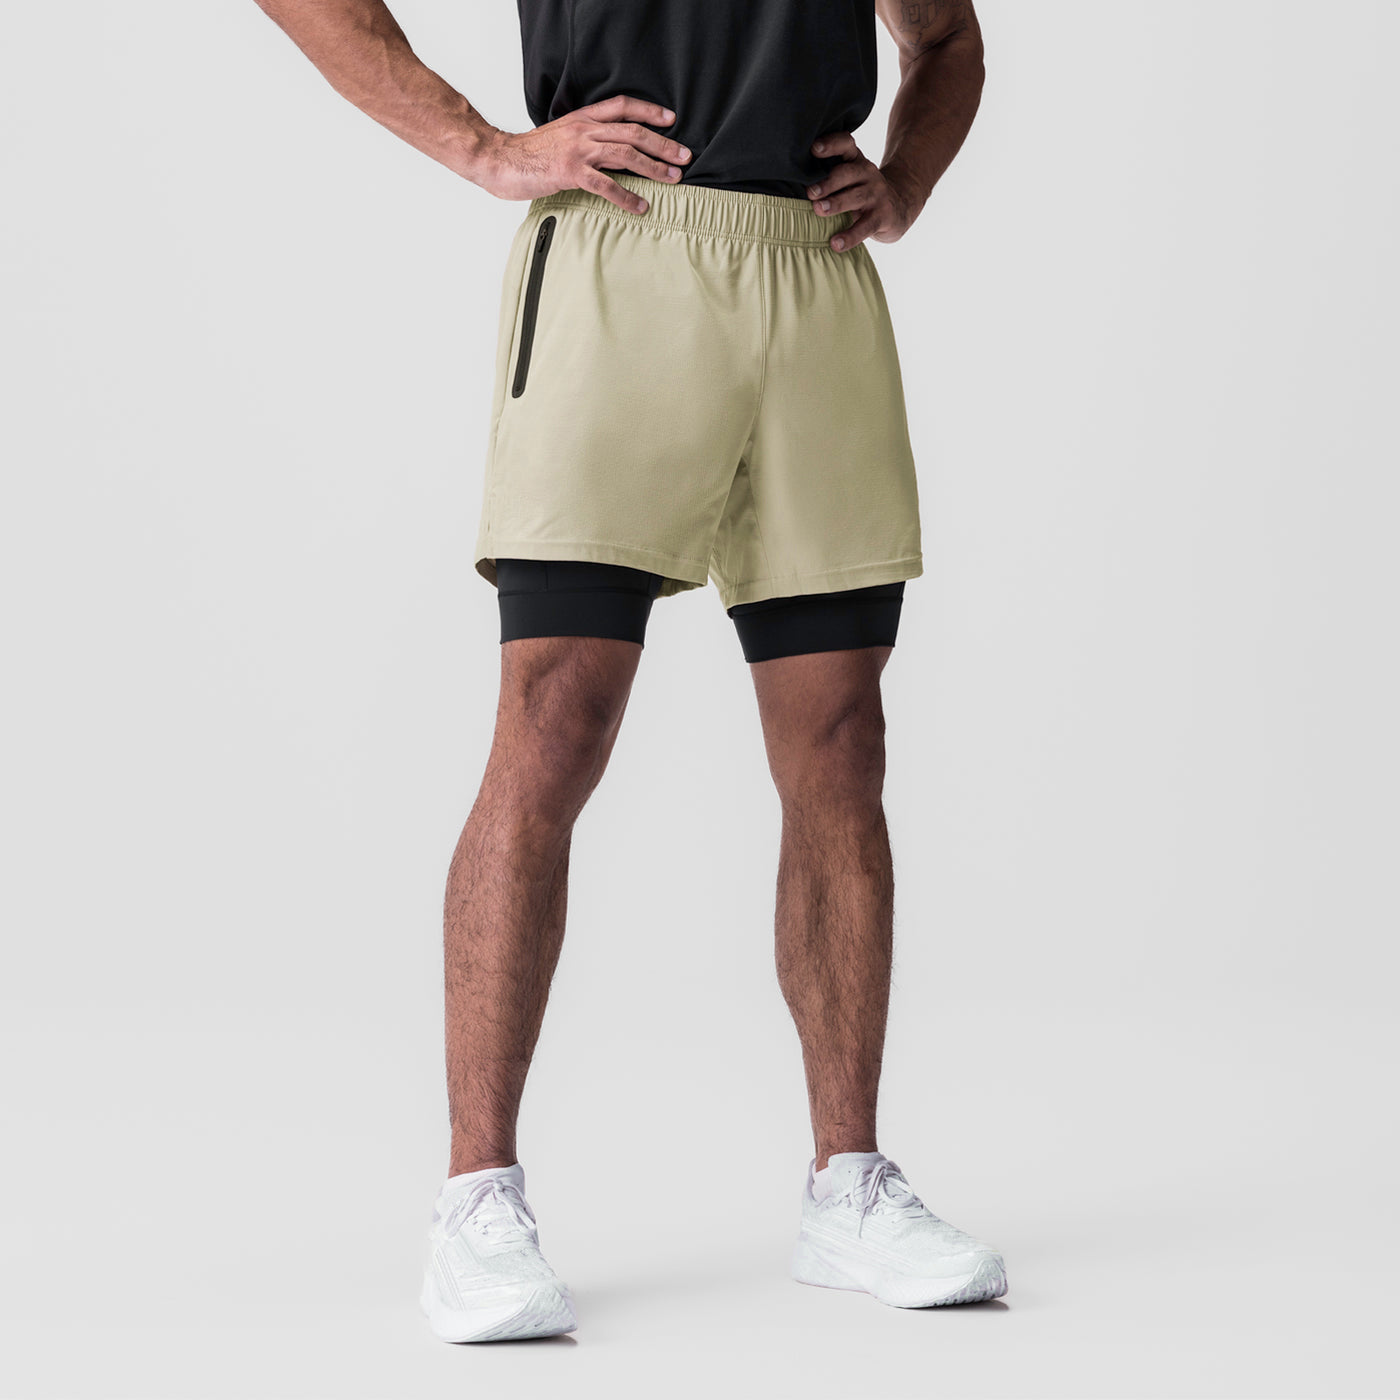 Men’s 2 in 1 Quick Dry Workout Shorts - Apricot